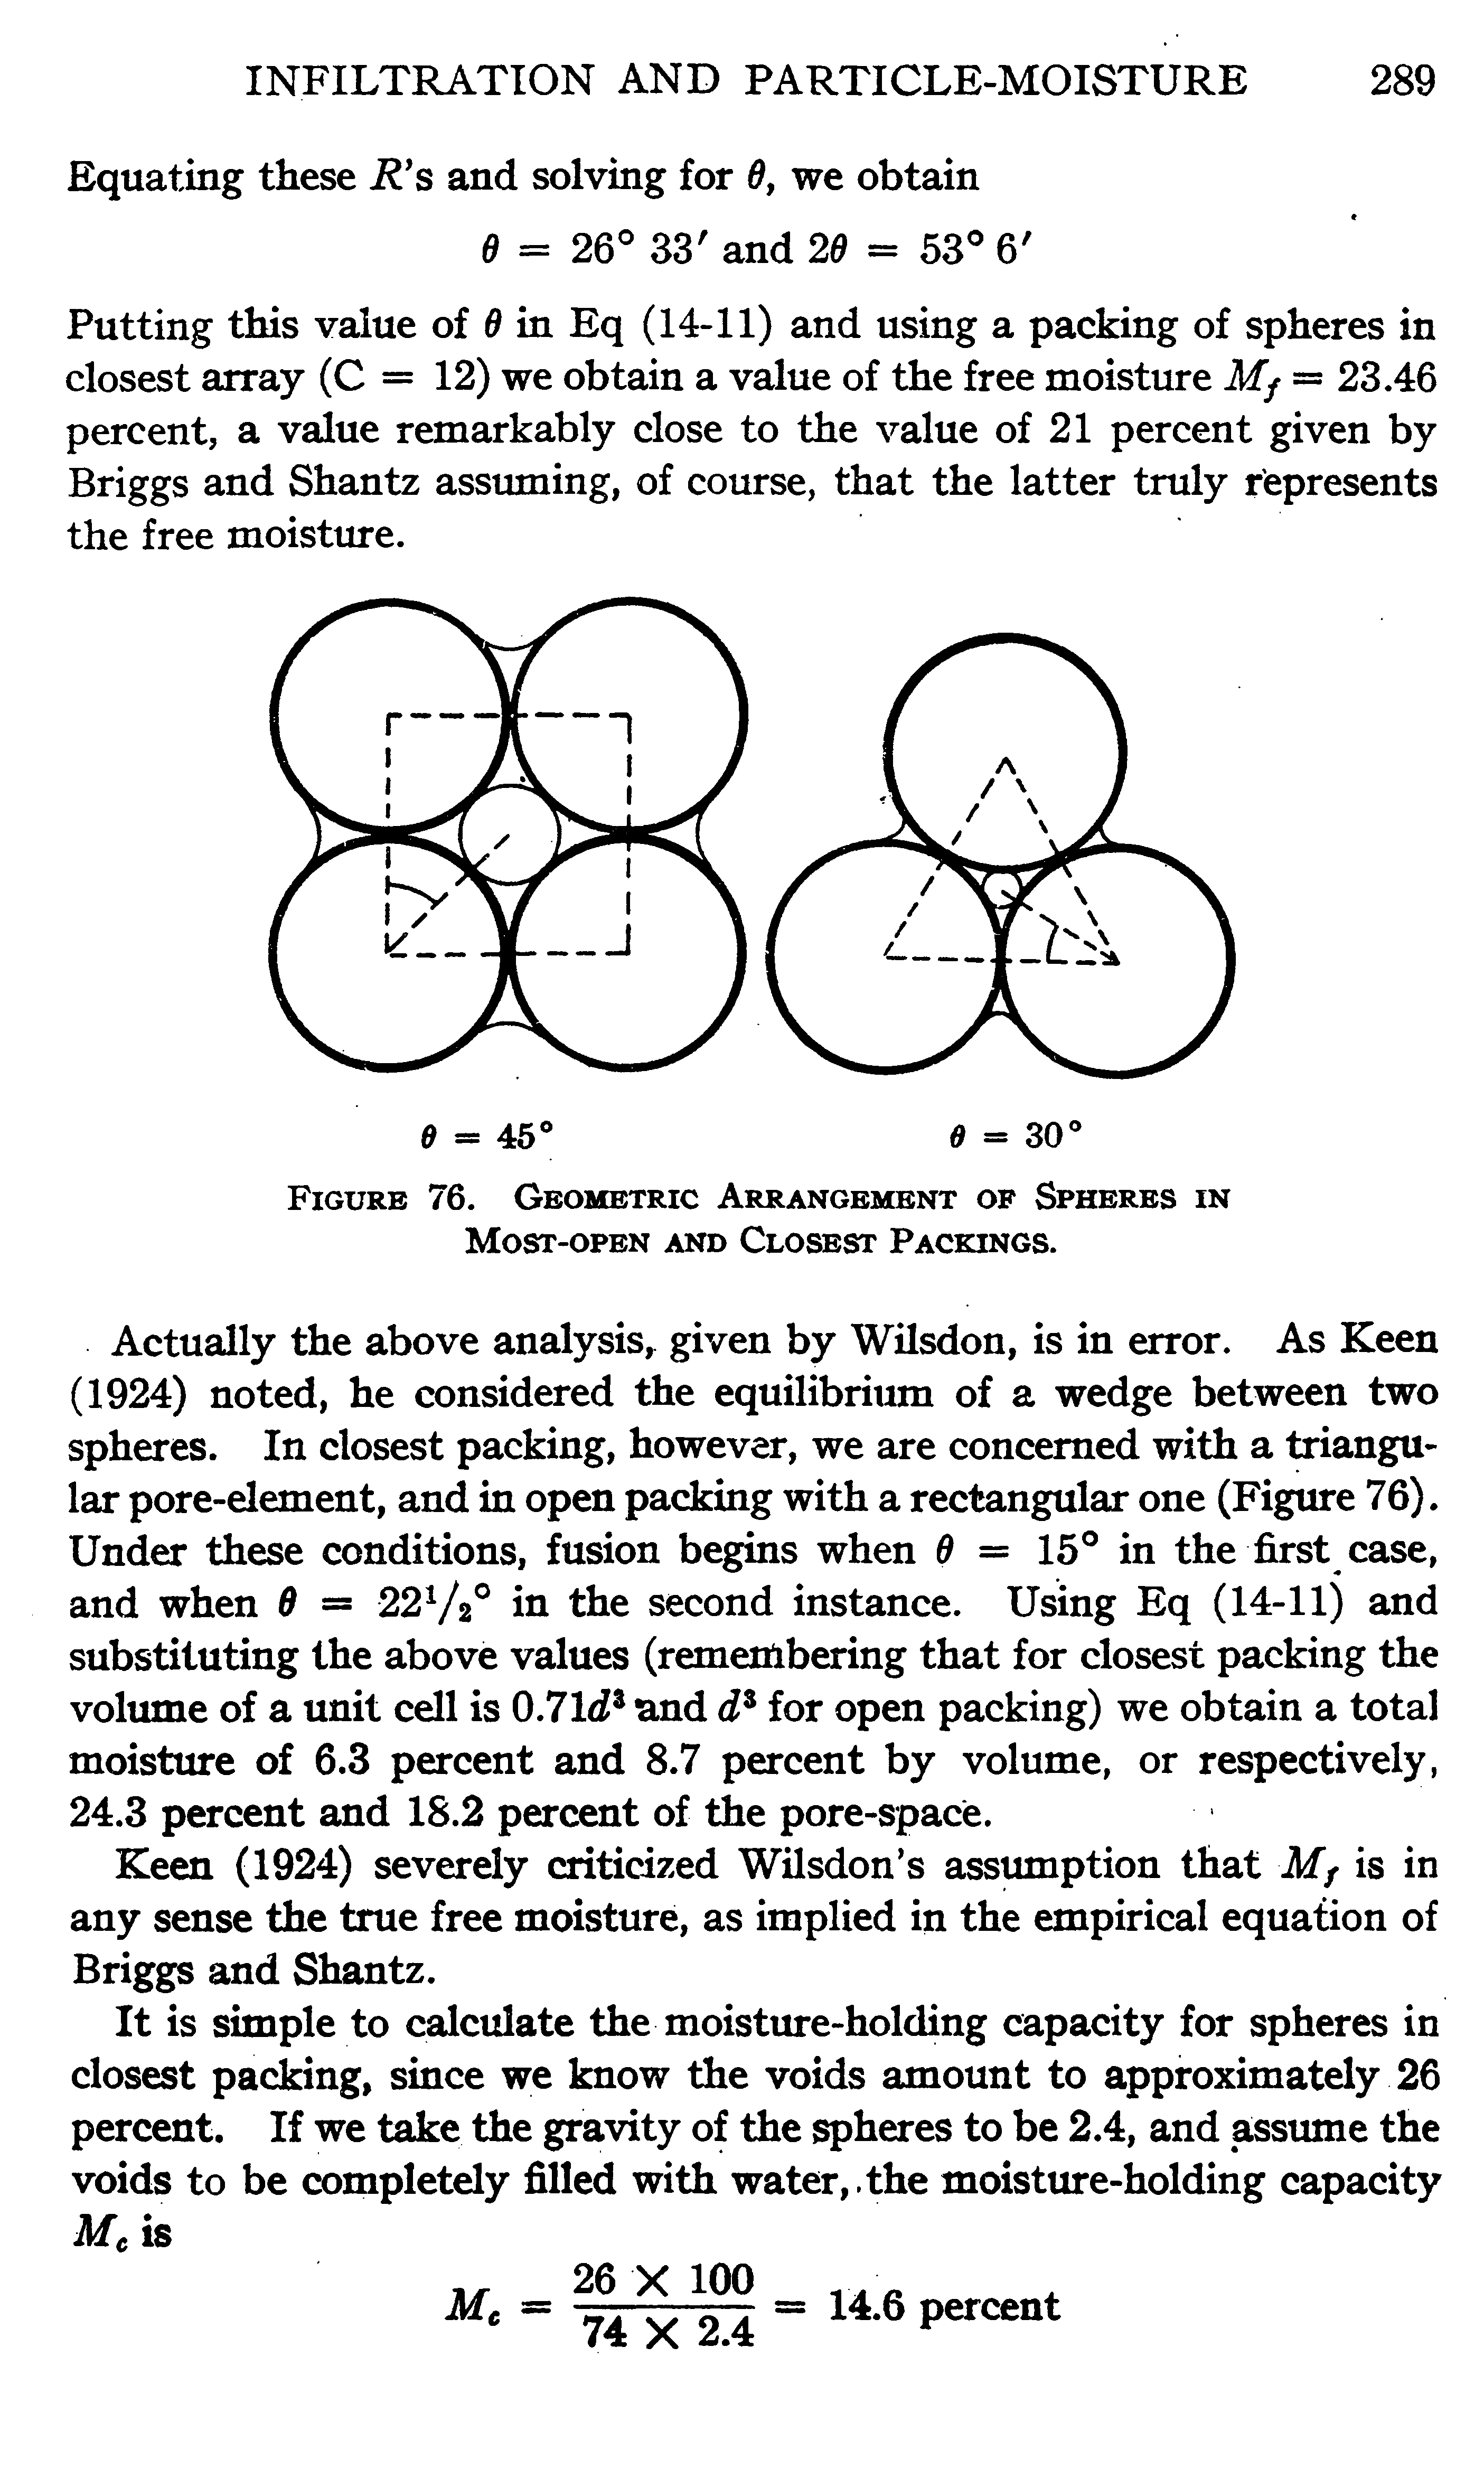 Figure 76. Geometric Arrangement of Spheres in Most-open and Closest Packings.